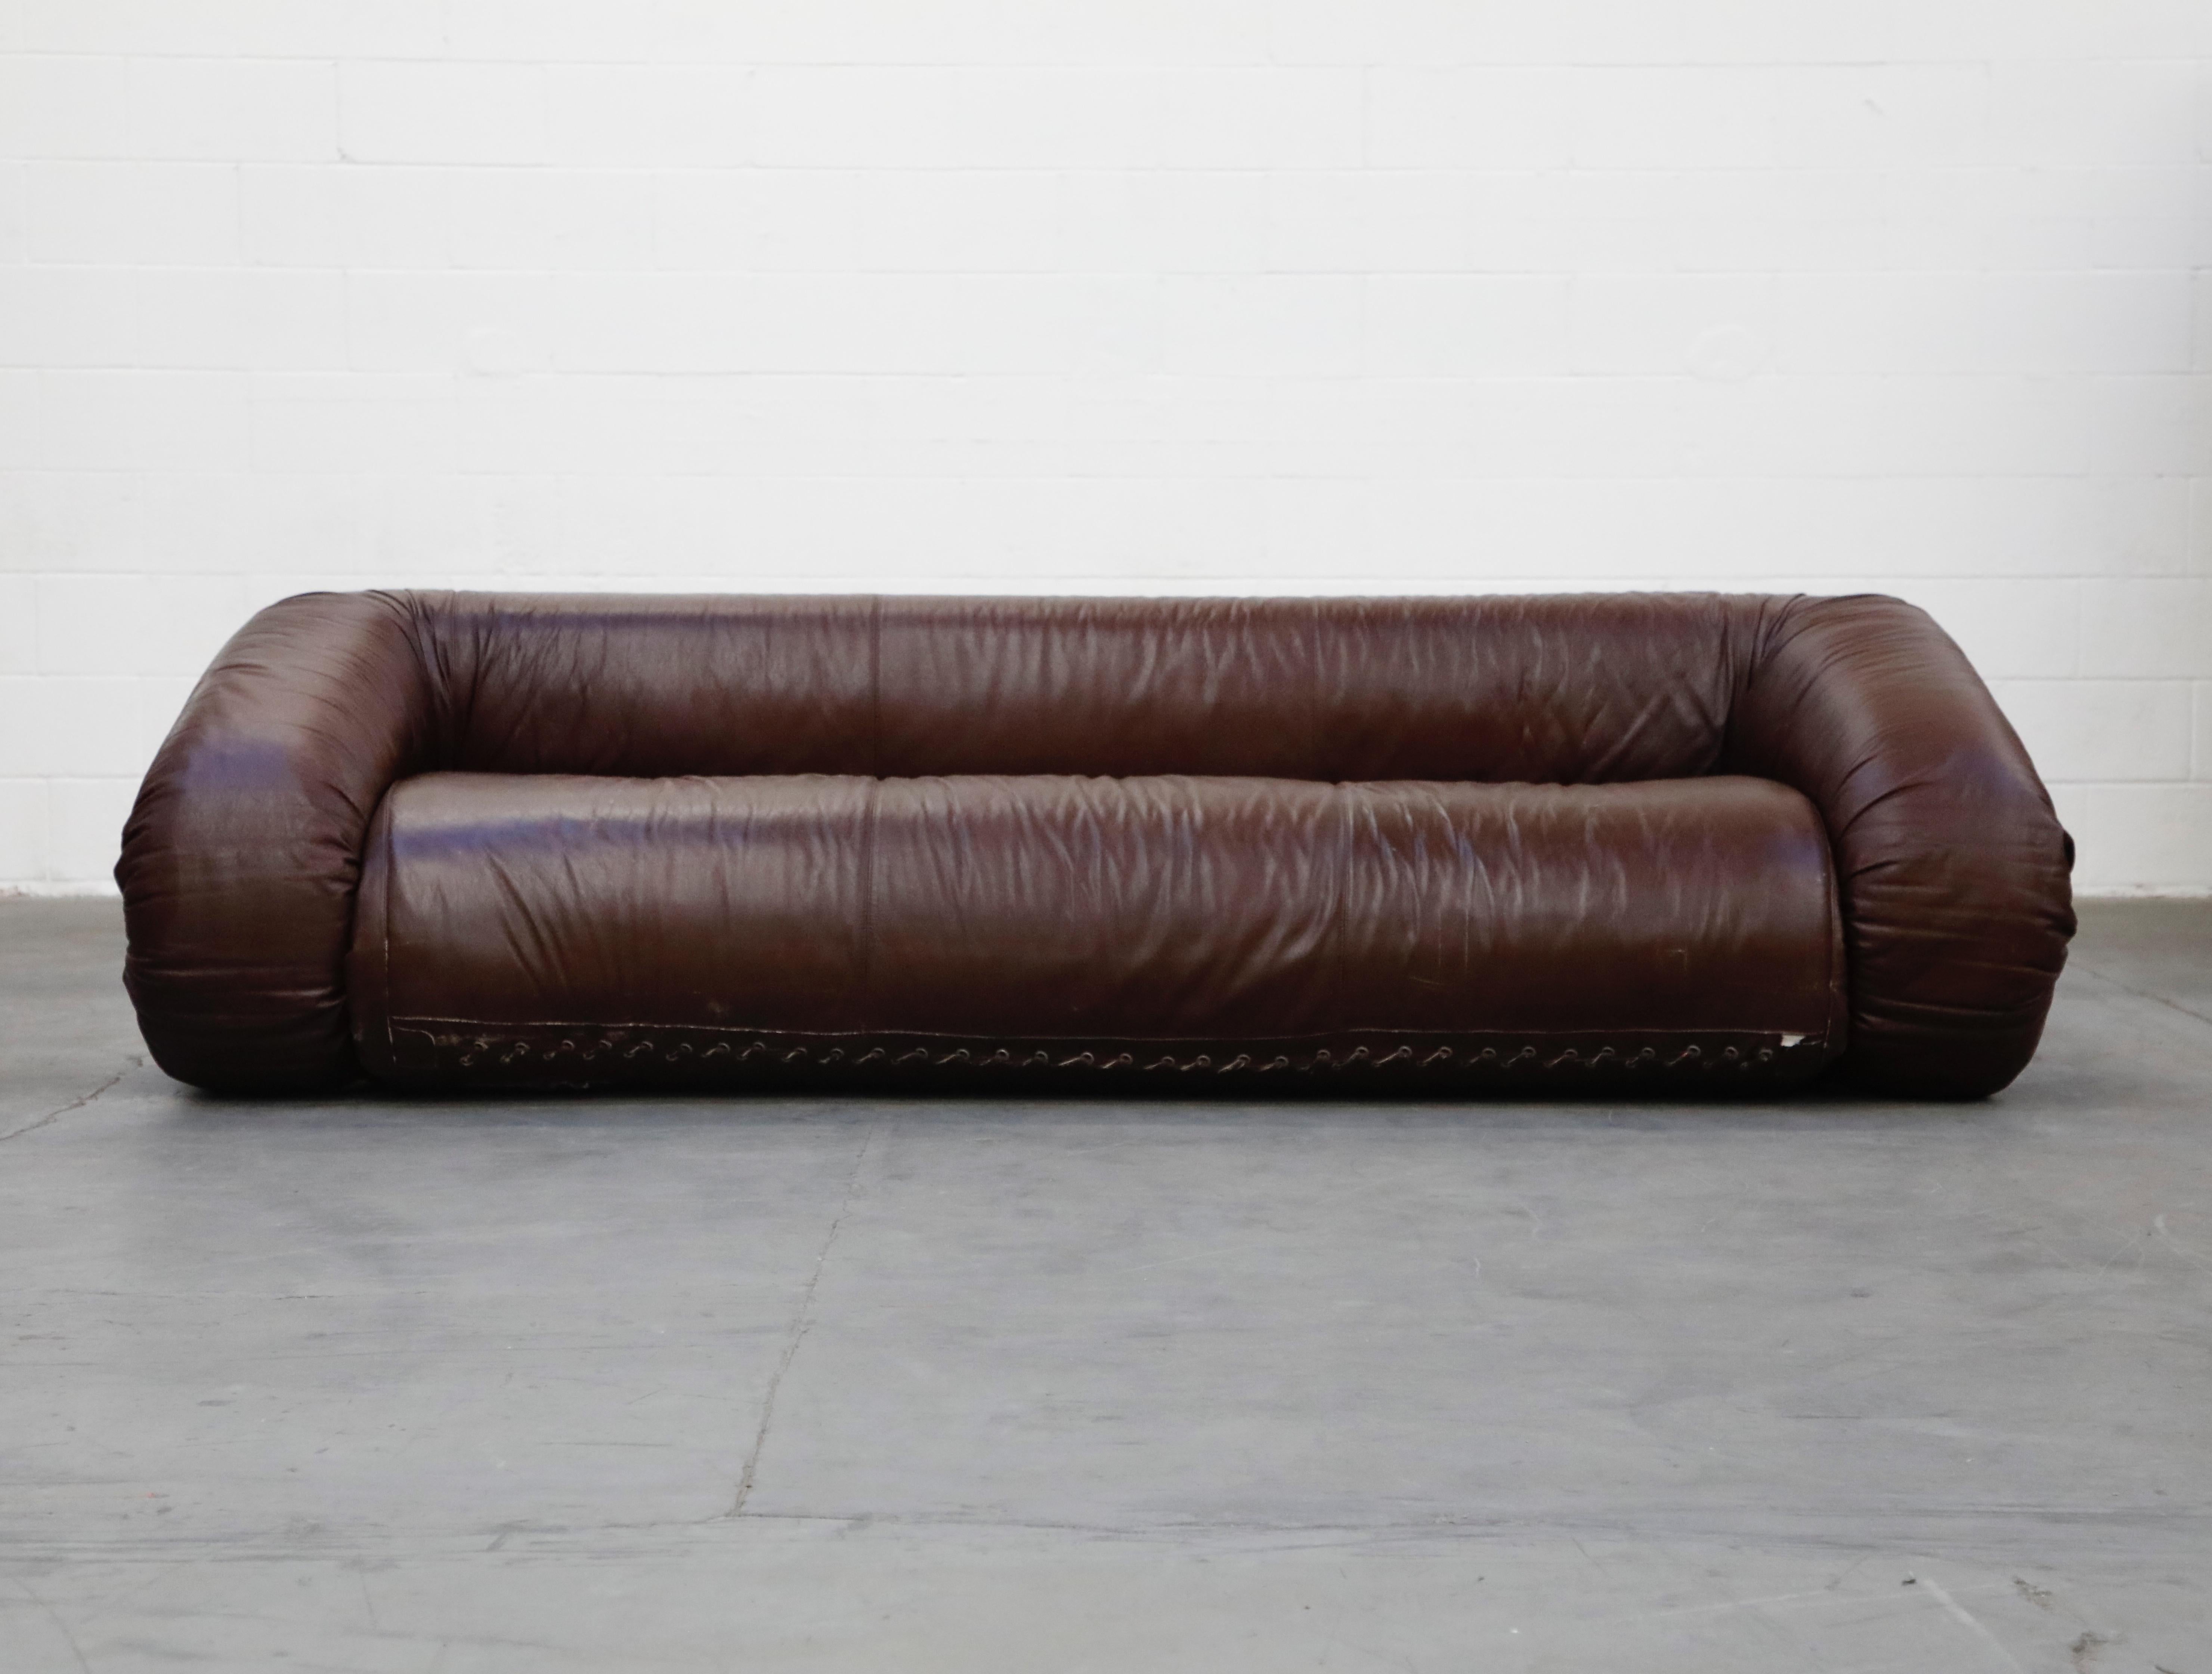 This incredibly coveted and sought after 'Anfibio' convertible sofa bed is by Alessandro Becchi for Giovanetti, designed and produced in the early 1970s, featuring incredibly luscious deep brown leather which has a slight warm tone that gives